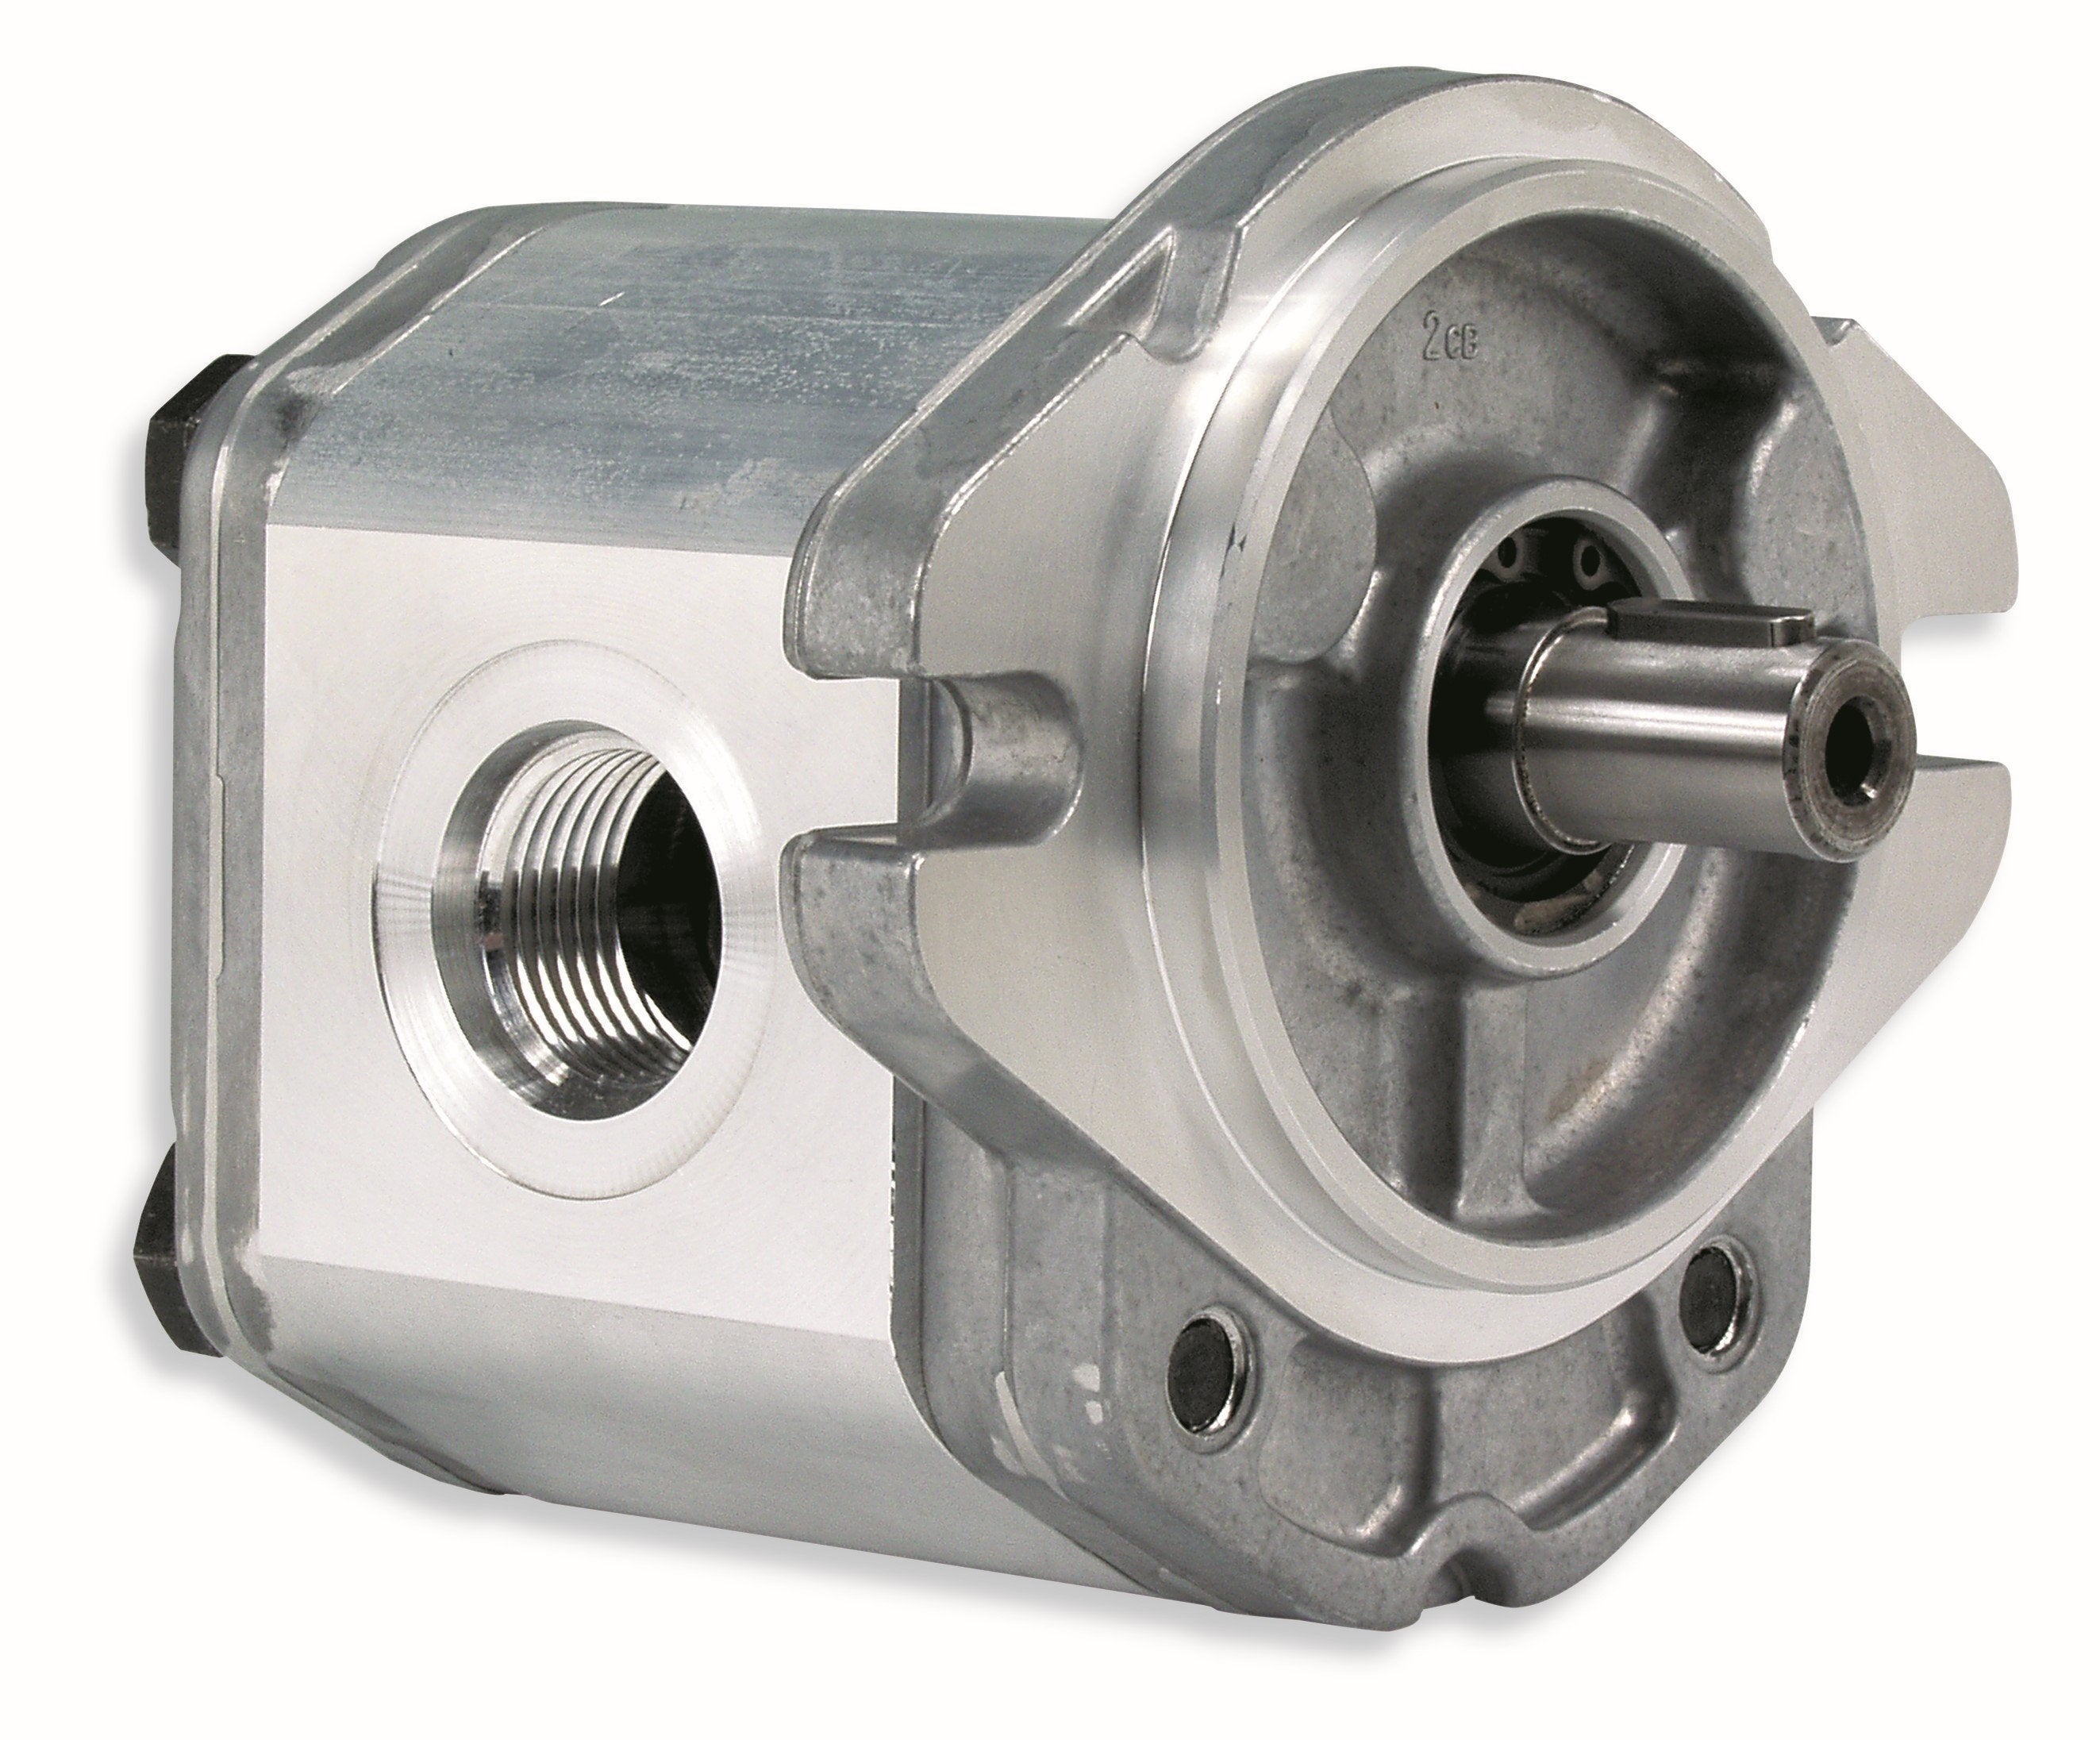 GHM3A-R-135-S1-E4 : Marzocchi Gear Motor, Bidirectional, 87cc, 2320psi rated, 2000RPM, 1.25" Code 61 ports, 13T 16/32DP Splined Shaft